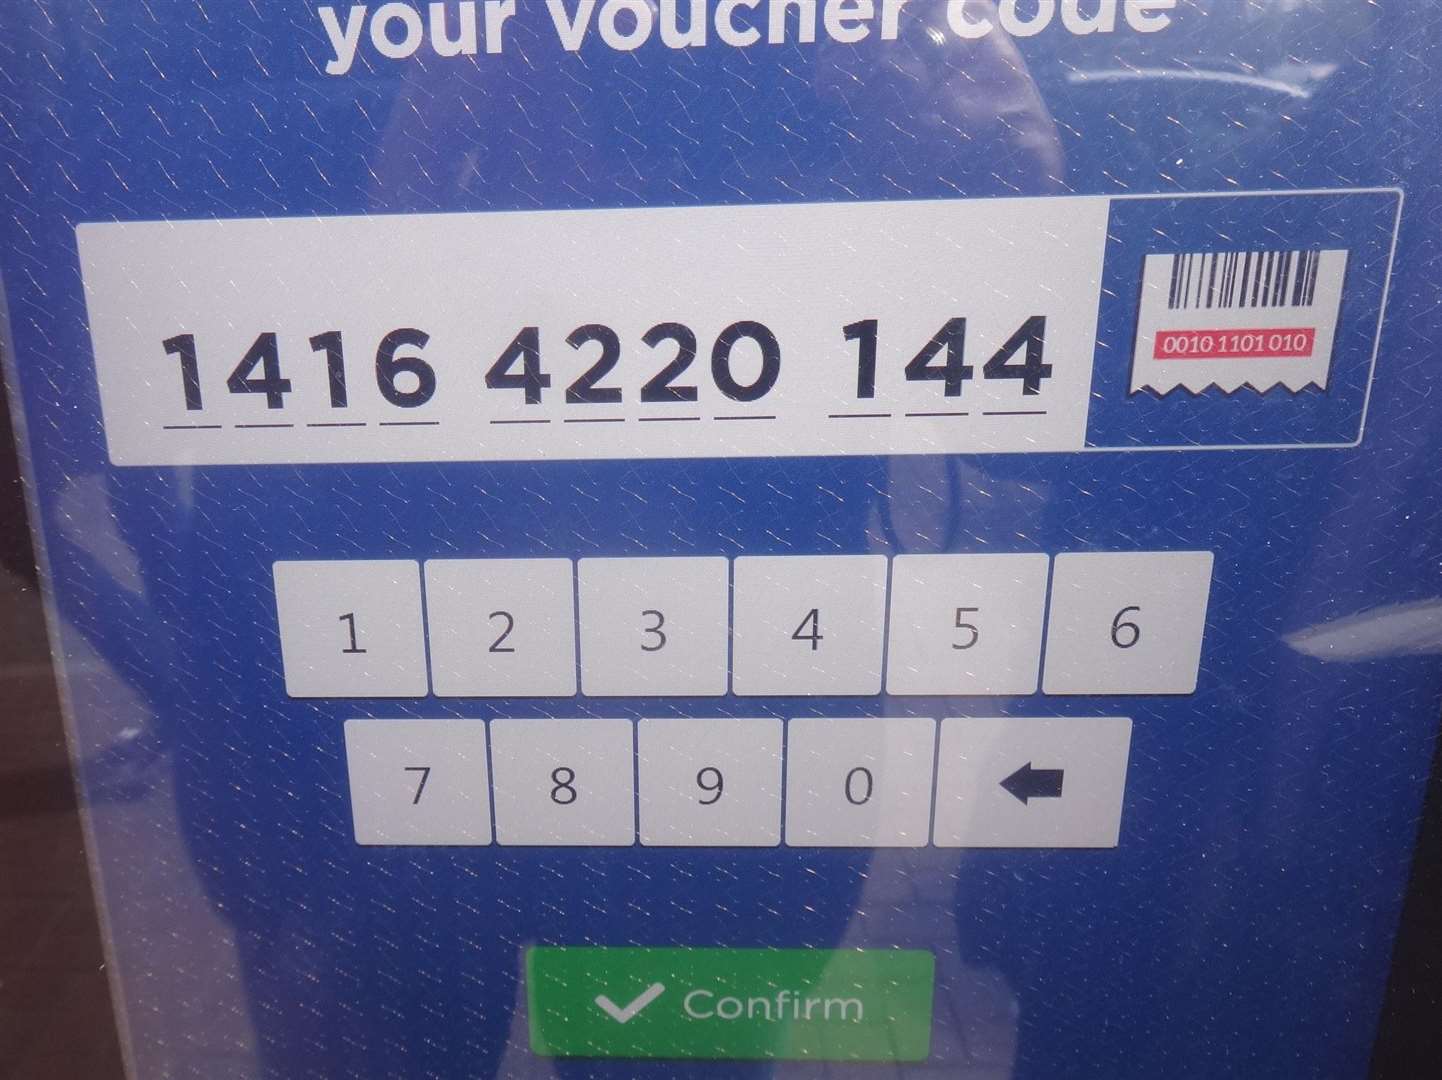 The code from the receipt entered into the parking validation machine